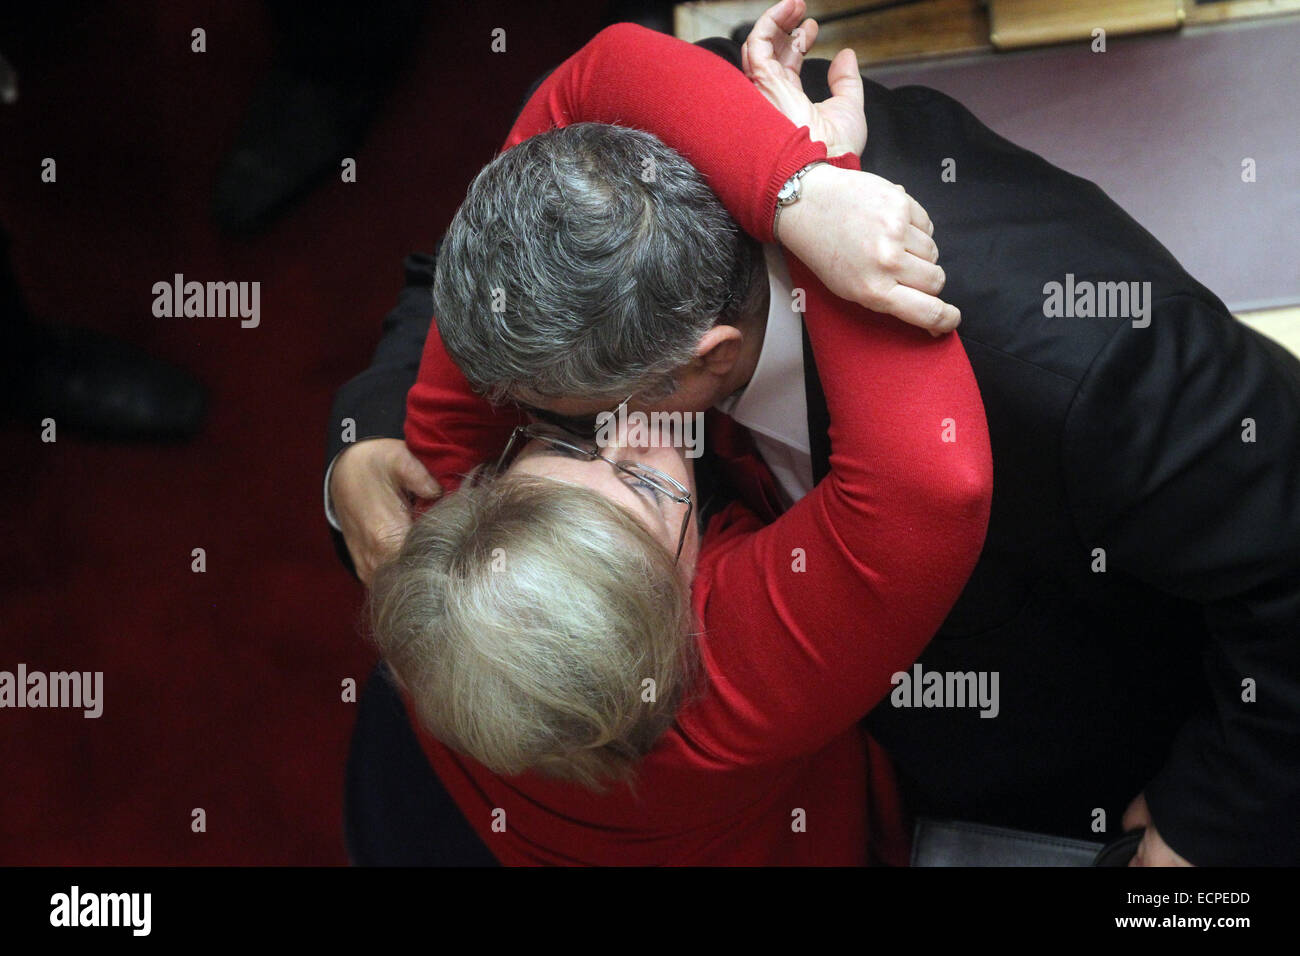 Athens, Greece. 17th Dec, 2014. The leader of the far-right political party Golden Dawn Nikos Michaloliakos (R), is kissed by his wife and lawmaker Eleni Zaroulia during the first round of voting to elect a new president of the Hellenic Republic at the Parliament in Athens, Greece, Dec. 17, 2014. Greek parliament failed on Wednesday to elect a new President of the Hellenic Republic in the televised first round of the roll-call vote on Wednesday evening. Credit:  Marios Lolos/Xinhua/Alamy Live News Stock Photo